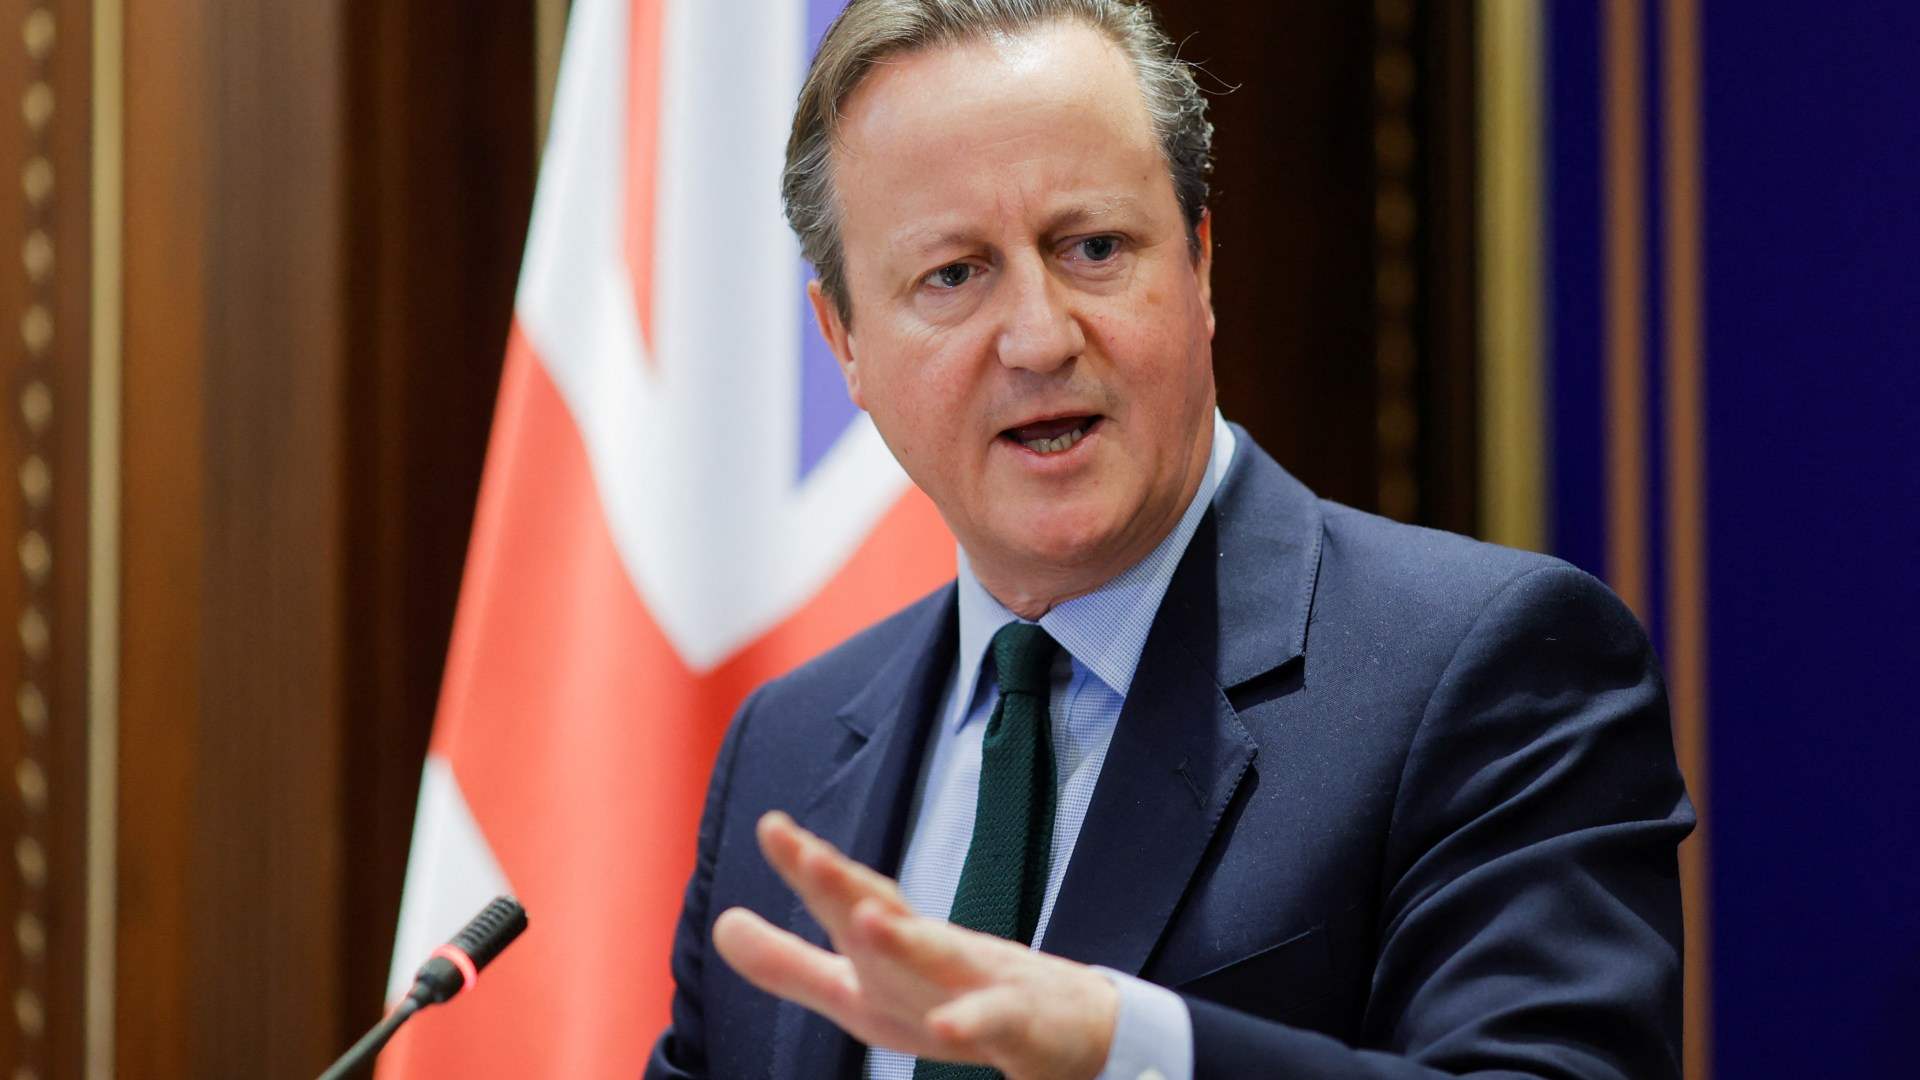 FM Cameron: UK support for Israel &#39;is not unconditional&#39;